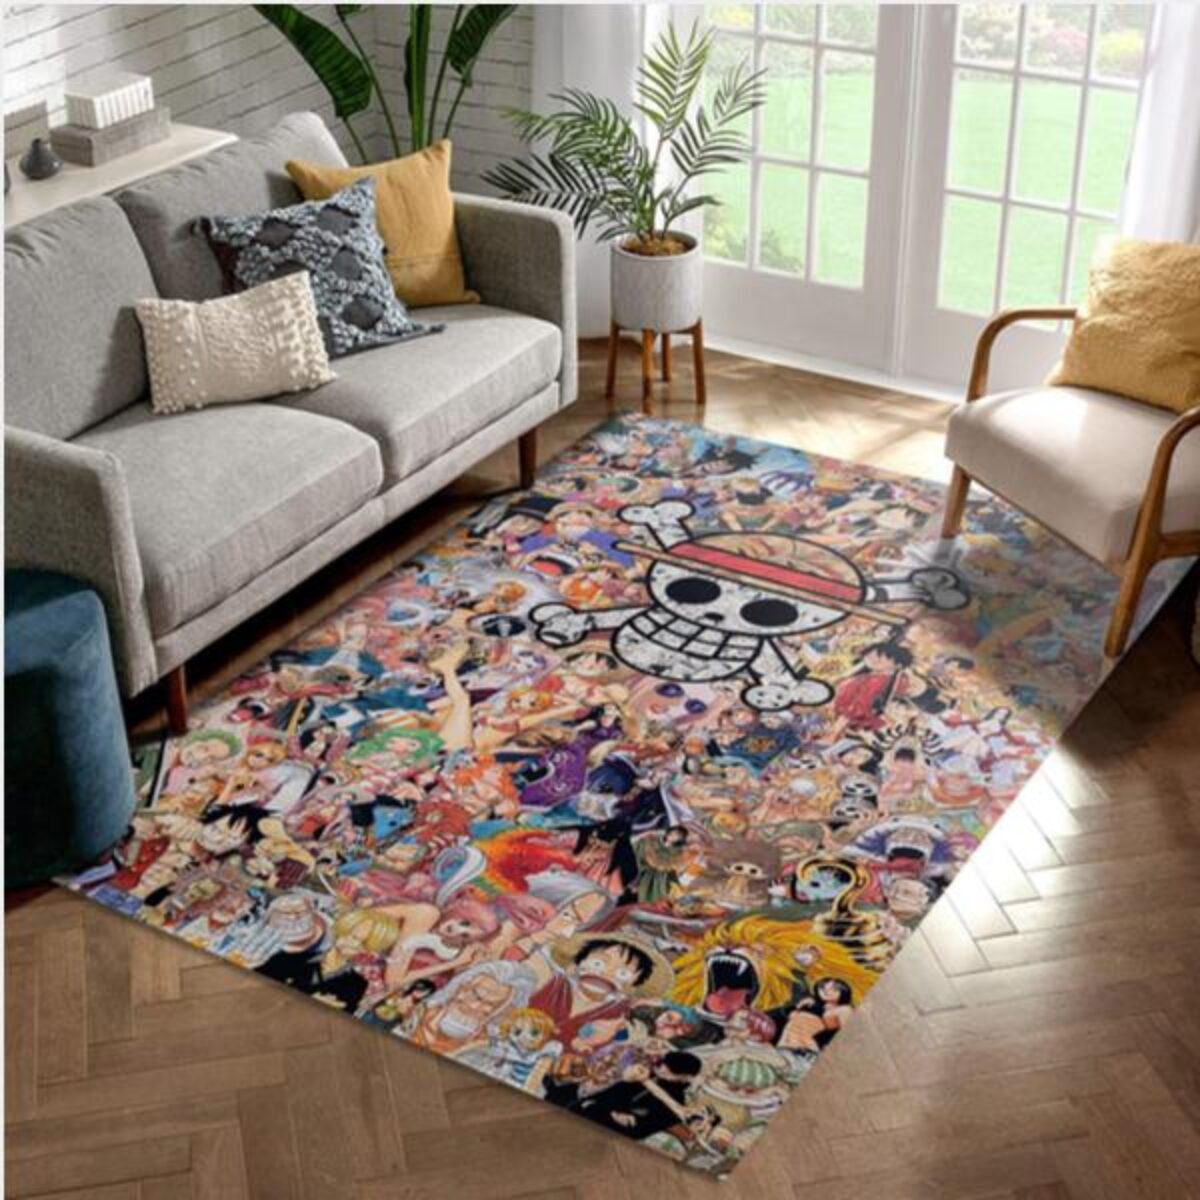 My Hero Academia Bed Set Single/Double/King Size 3D Anime Bedding Sets 3pcs  Duvet Cover Set for Boys Child Teens Girls 1 Quilt Cover + 2 Pillowcases  (No Comforter) : Amazon.co.uk: Home &